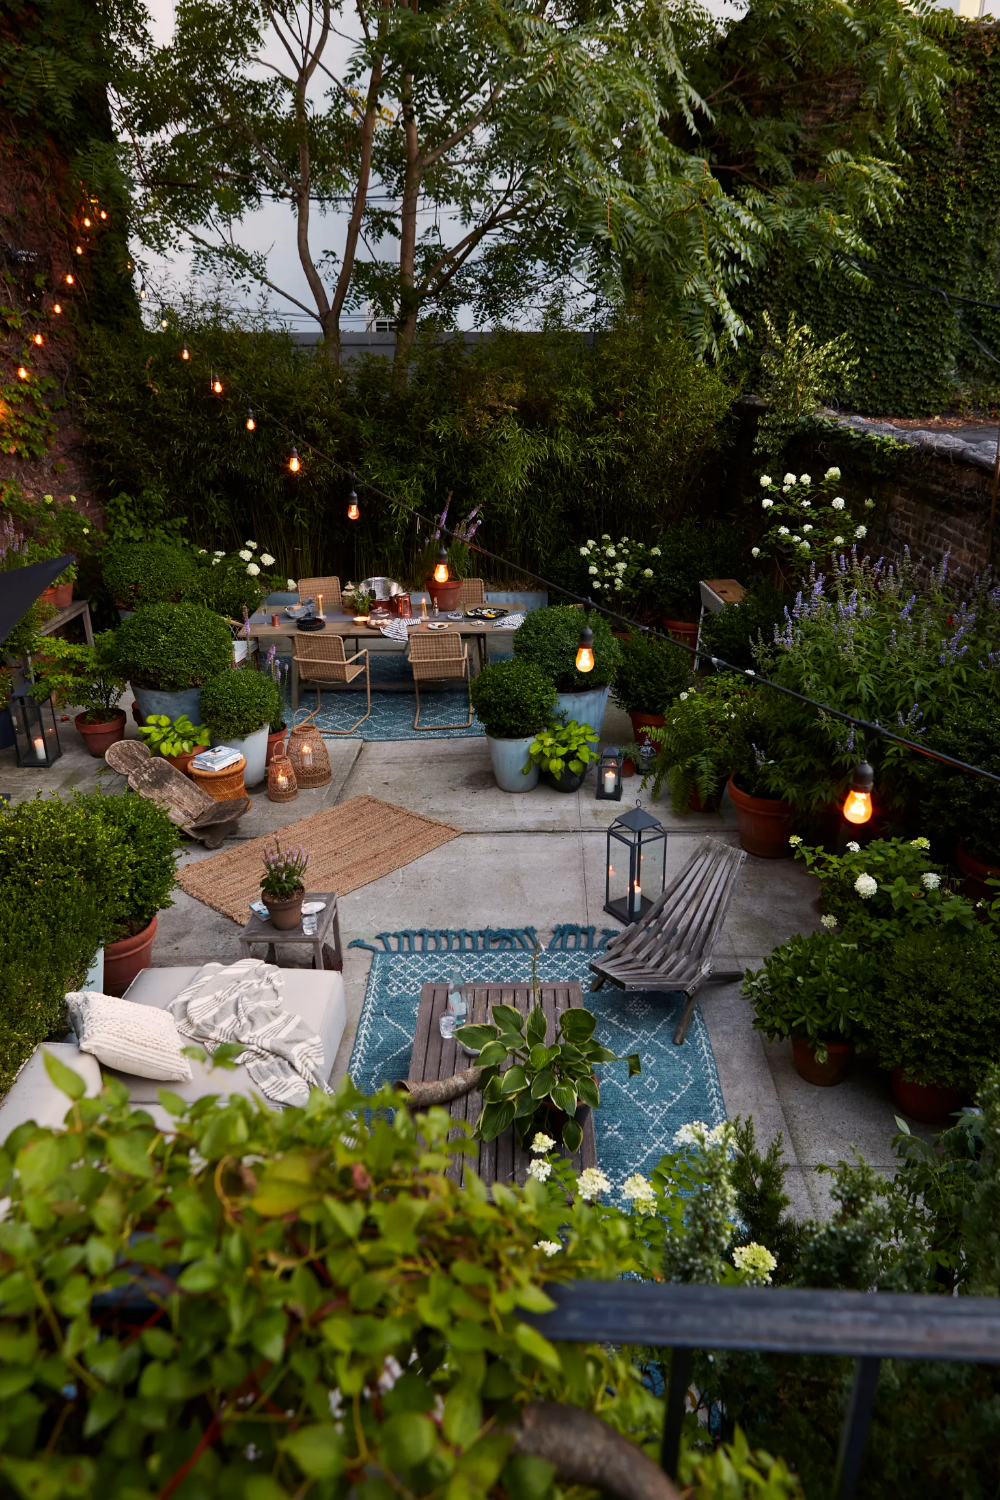 Embracing Nature: The Beauty of an Outdoor Living Room